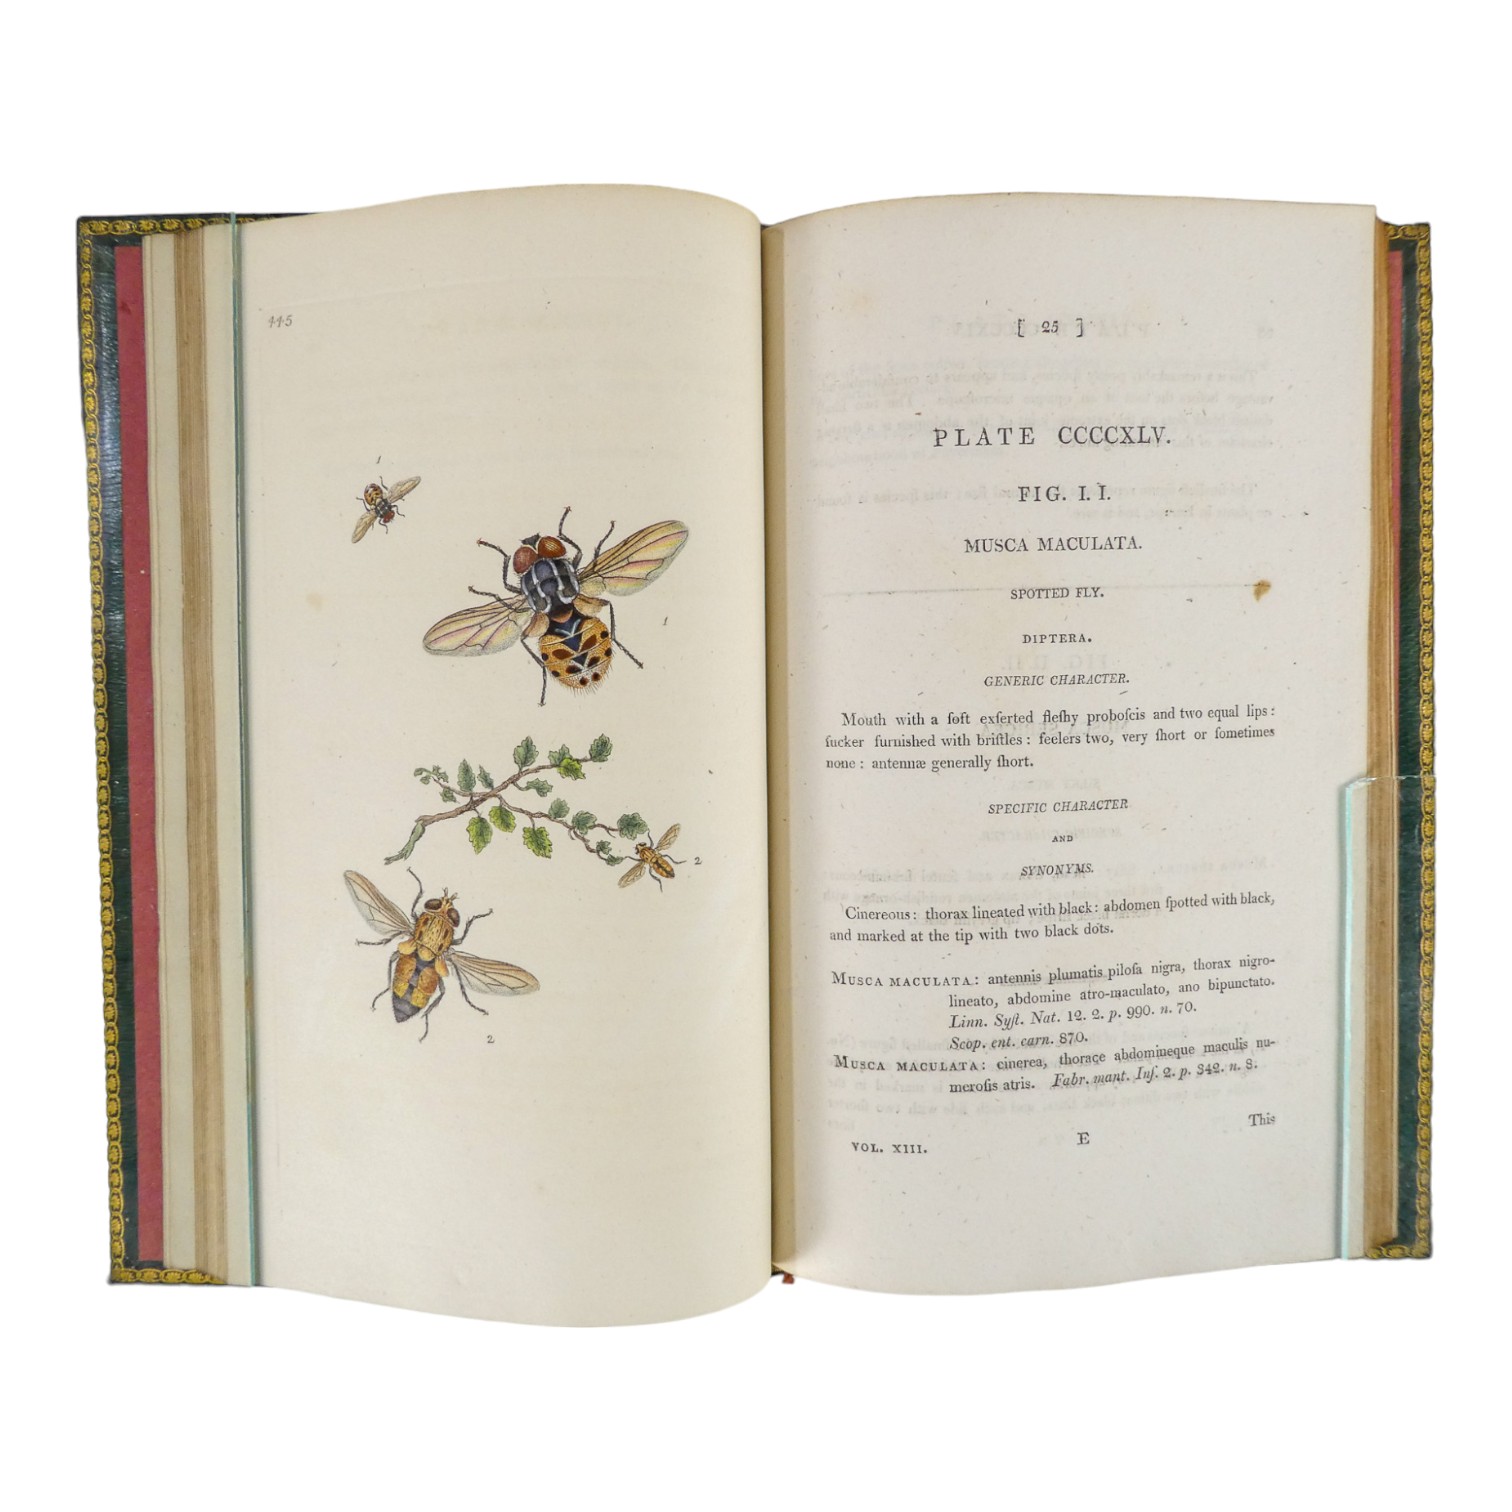 DONOVAN Edward, The Natural History of British Insects ... - published F & C Rivington 62 St Paul' - Image 29 of 33